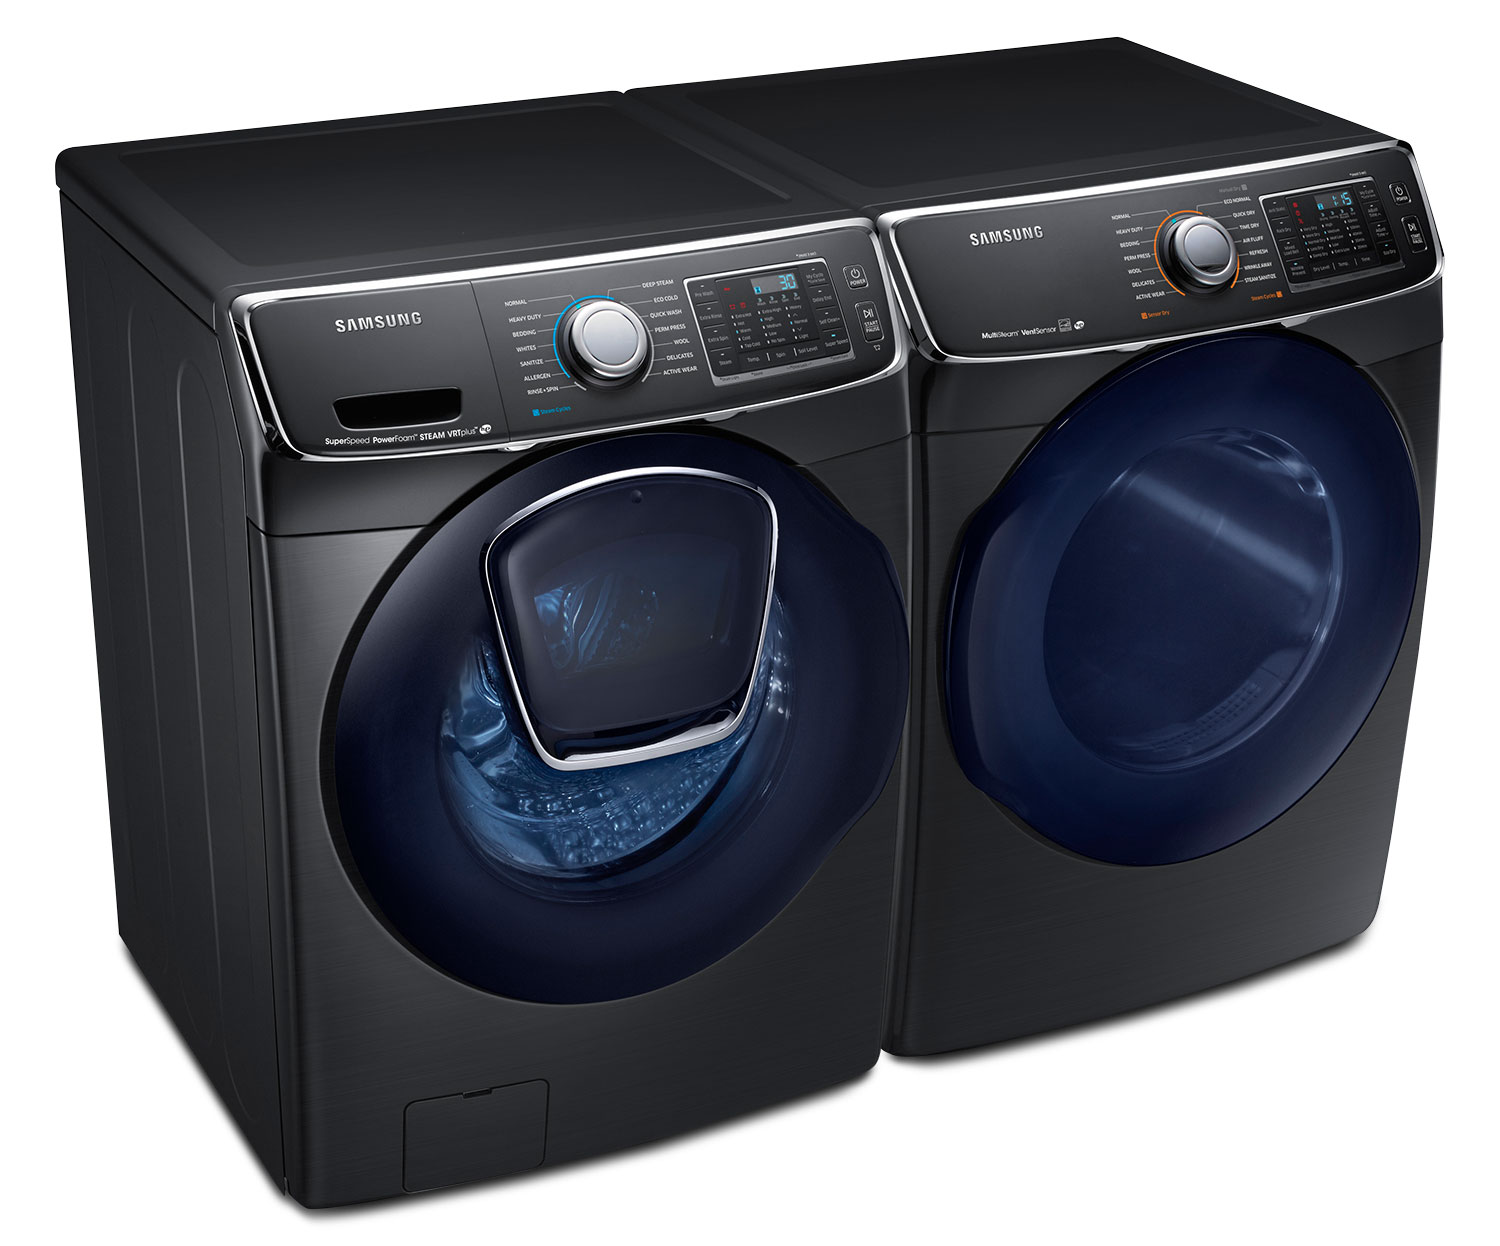 Samsung 5.8 Cu. Ft. Front-Load Washer and 7.5 Cu. Ft. Electric Dryer Samsung Stainless Steel Washer And Dryer